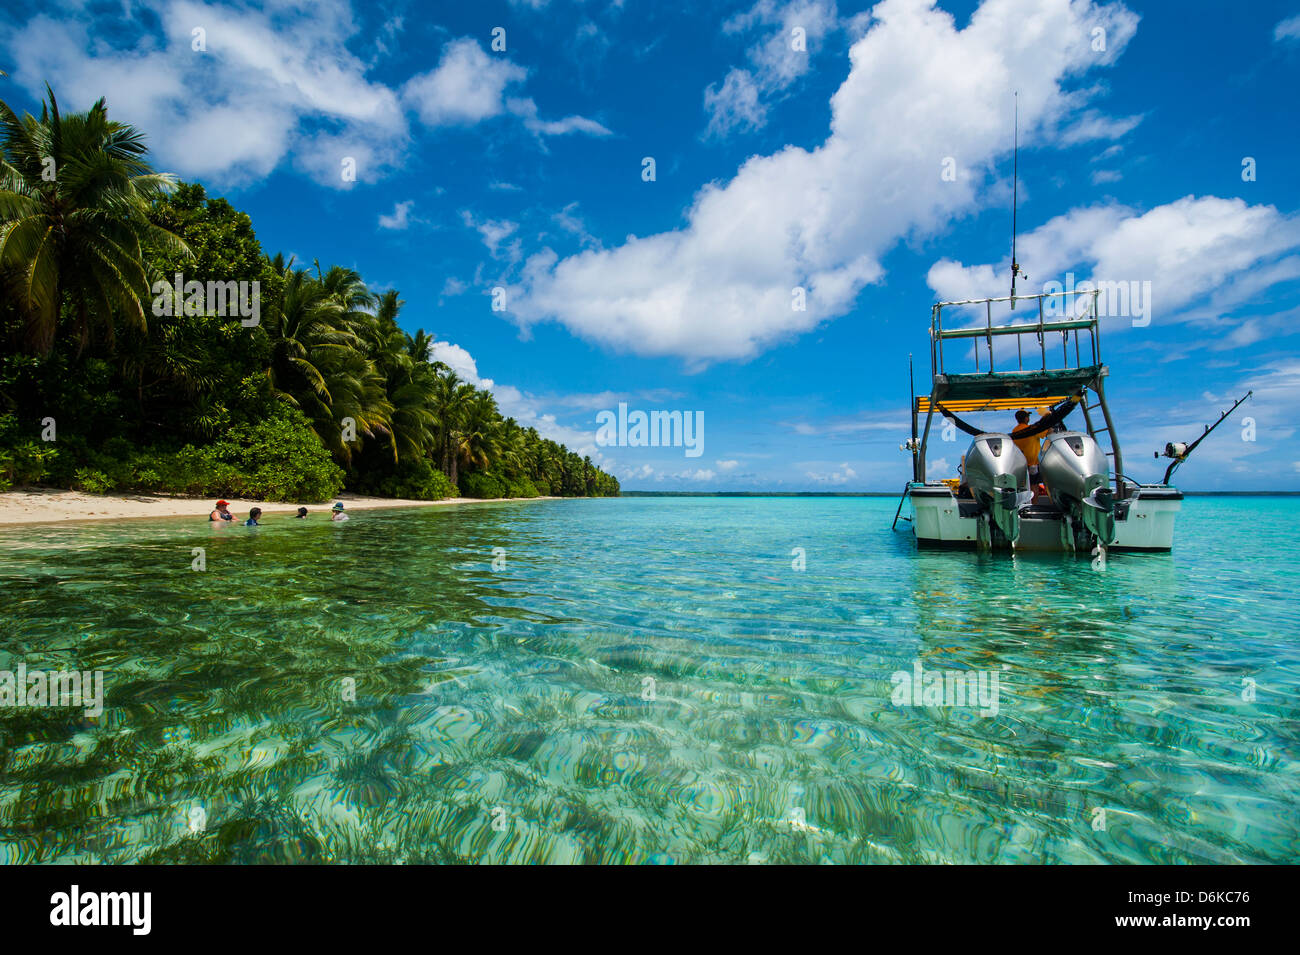 Little motor boat in the turquoise waters of the Ant Atoll, Pohnpei, Micronesia, Pacific Stock Photo